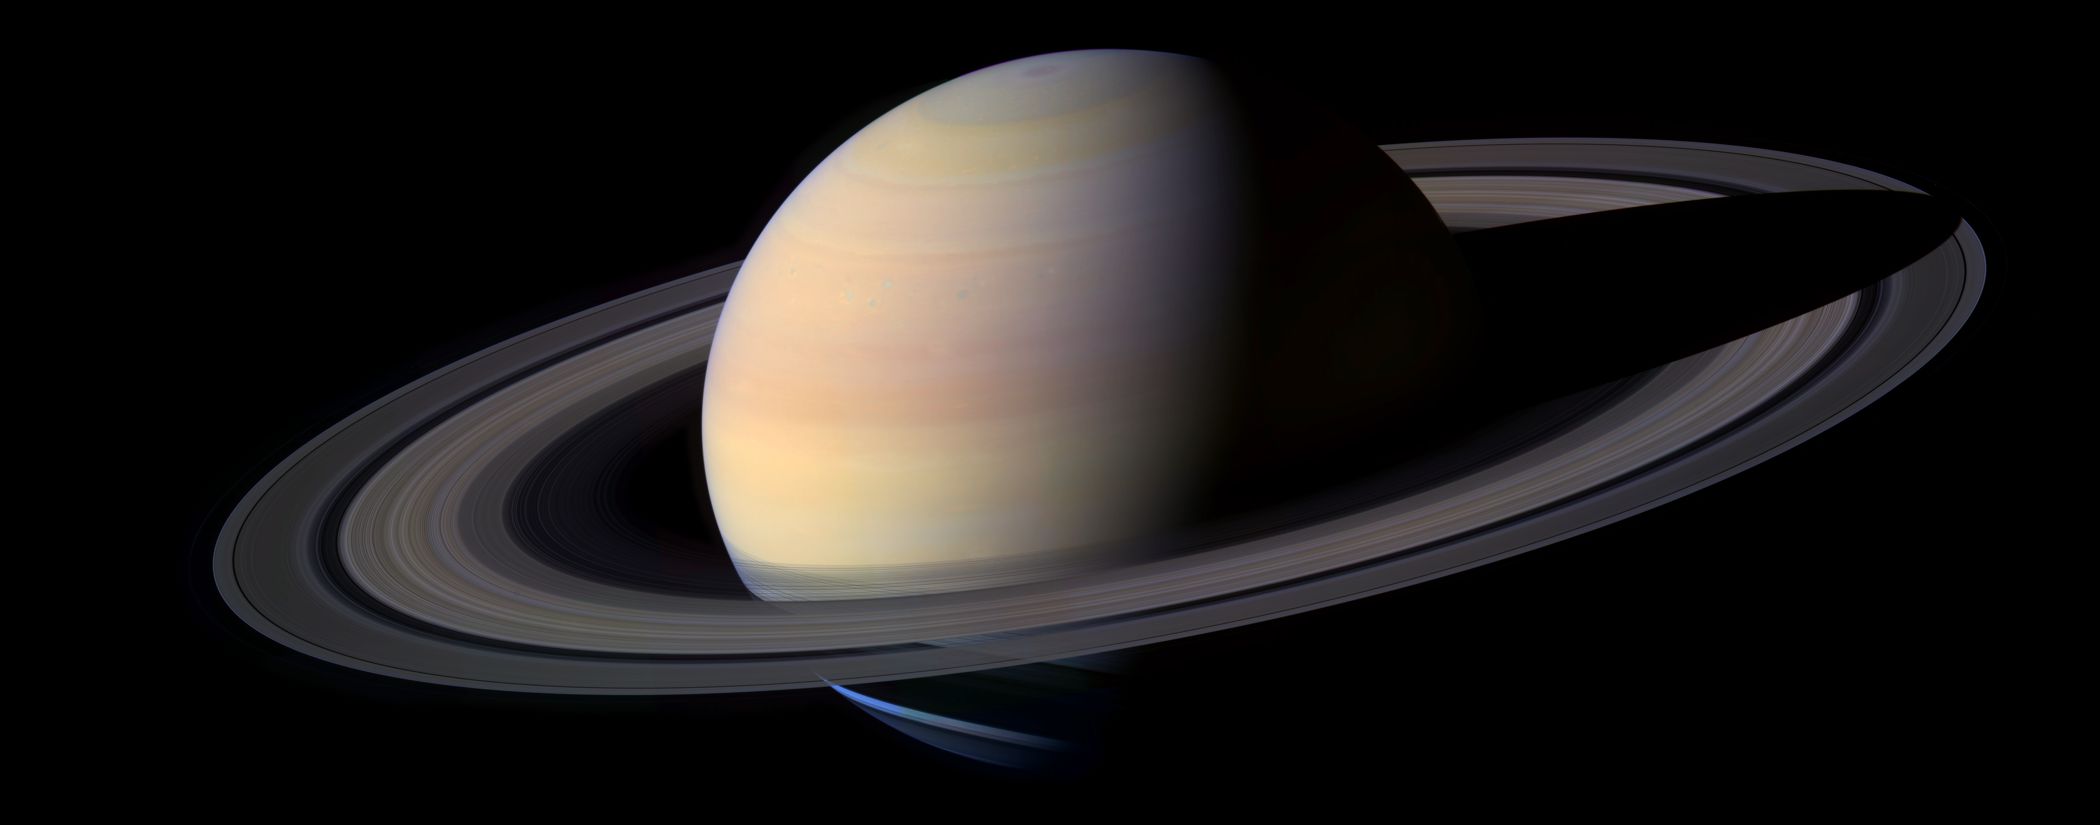 A brilliant image of Saturn, compiled by Mattias Malmer from 102 frames taken by the Cassini spacecraft